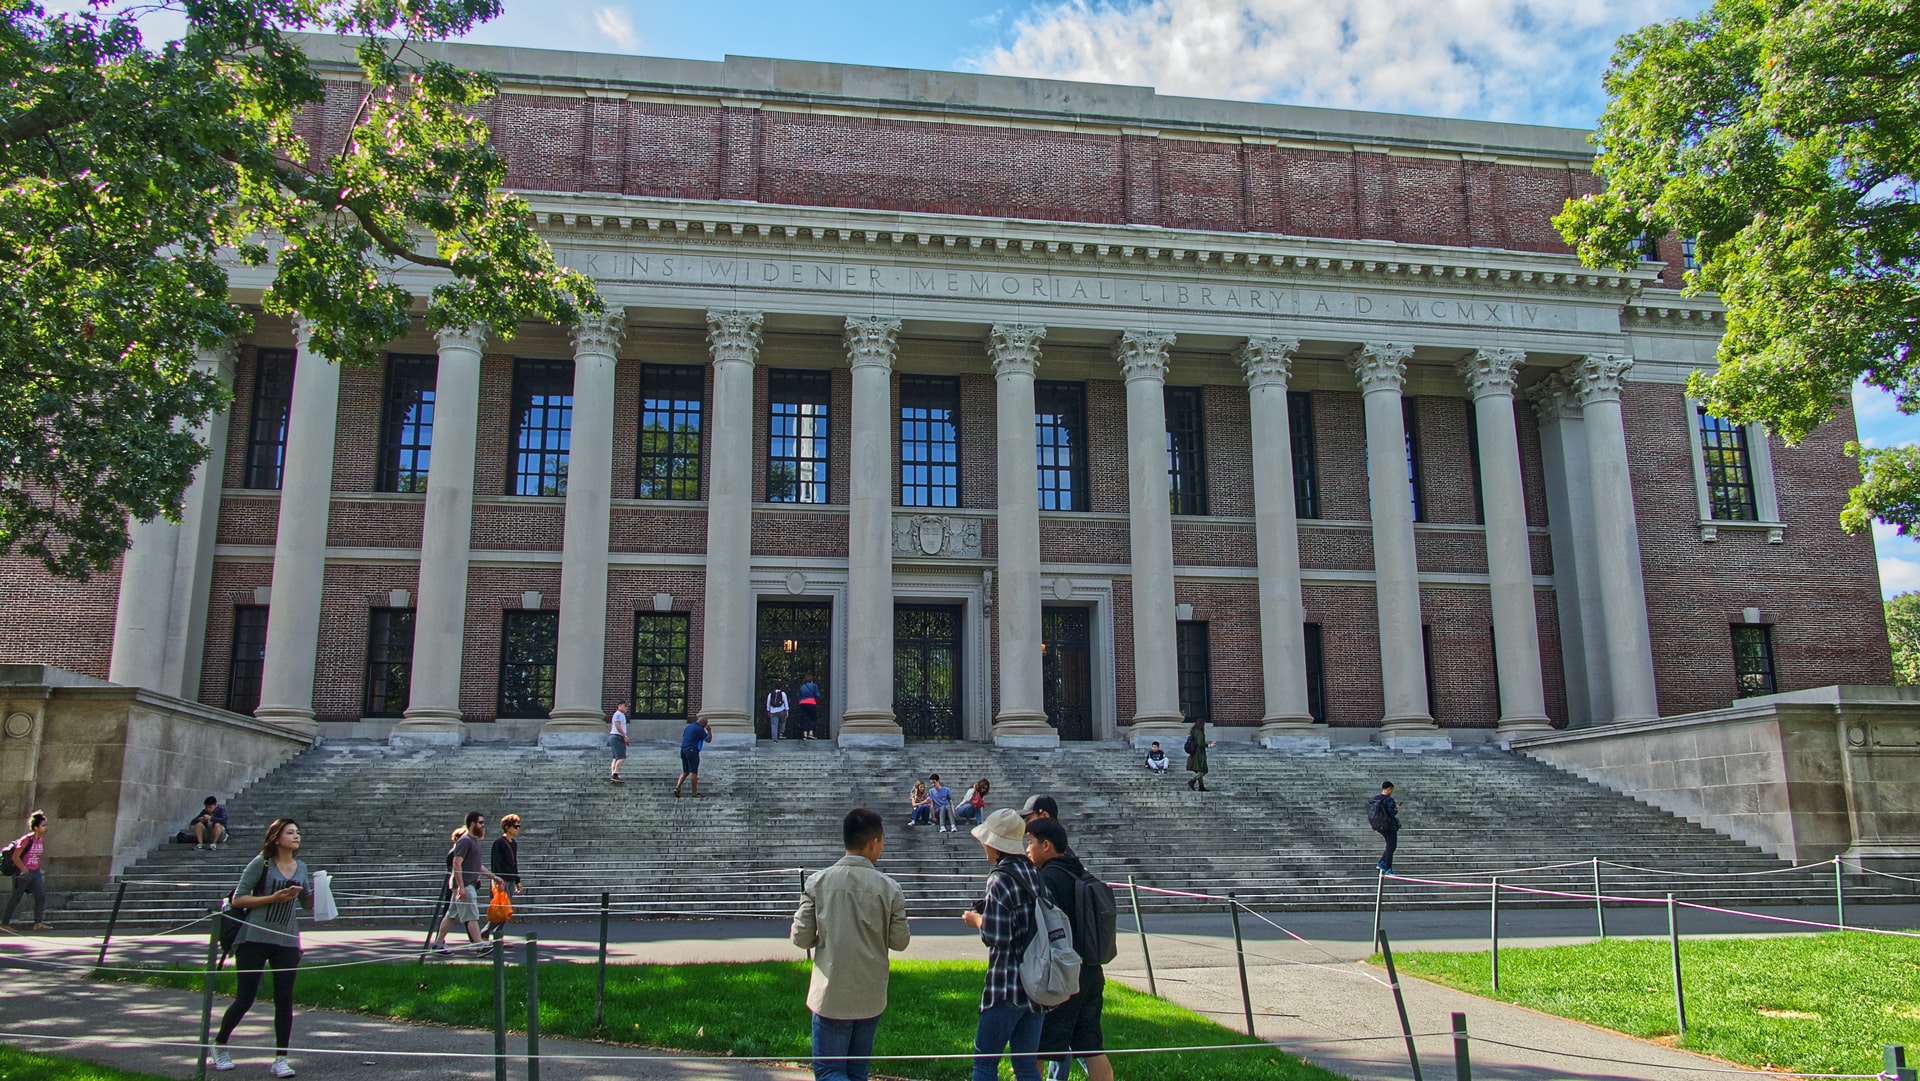 Students on the grass in front of and on the stairs of Widener Library at Harvard during the day